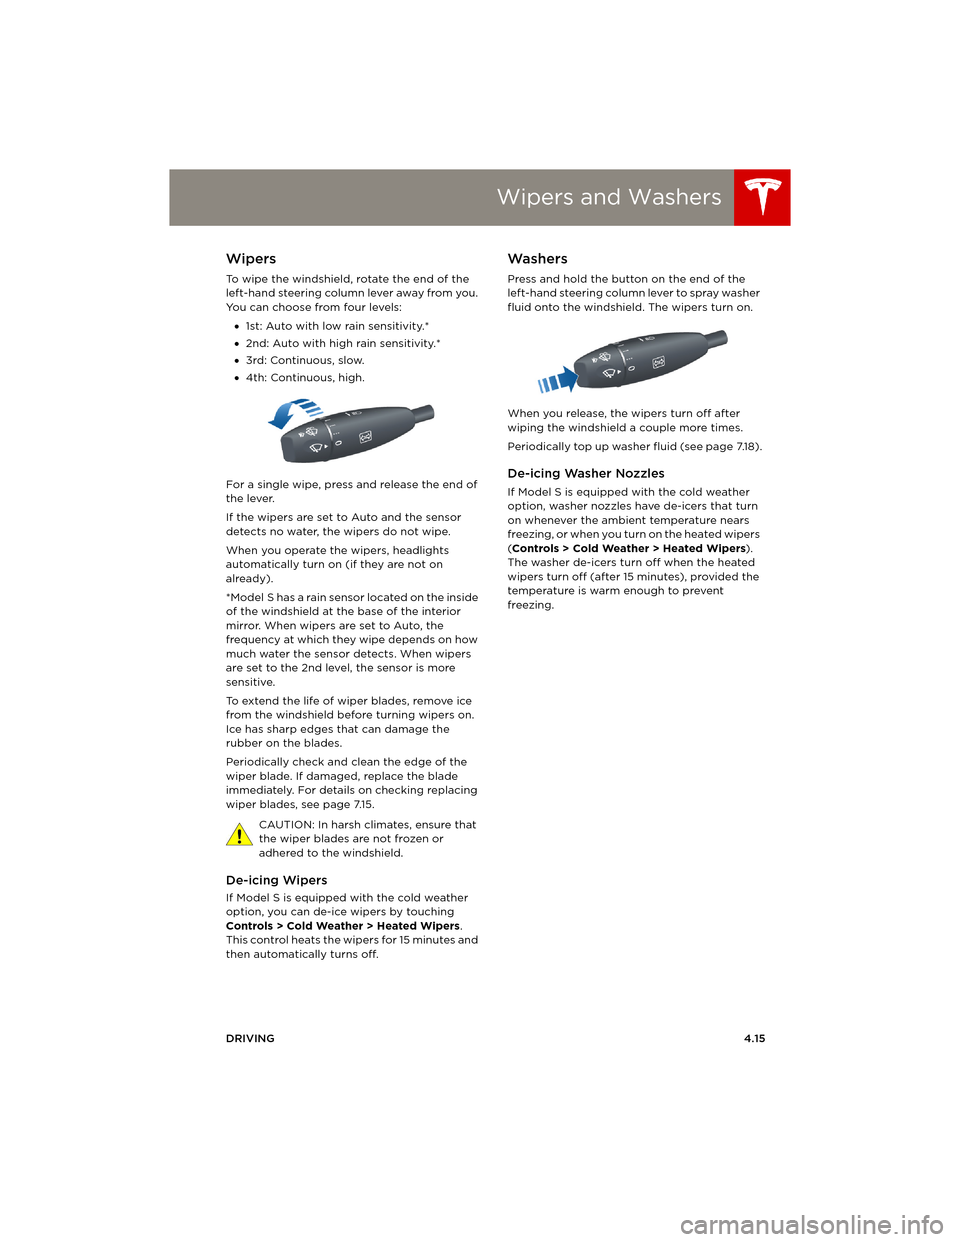 TESLA MODEL S 2014  Owners manual (Europe) Wipers and Washers
DRIVING4.15
Wipers and WashersWipers
To wipe the windshield, rotate the end of the 
left-hand steering column lever away from you. 
You can choose from four levels:
•1st: Auto wit